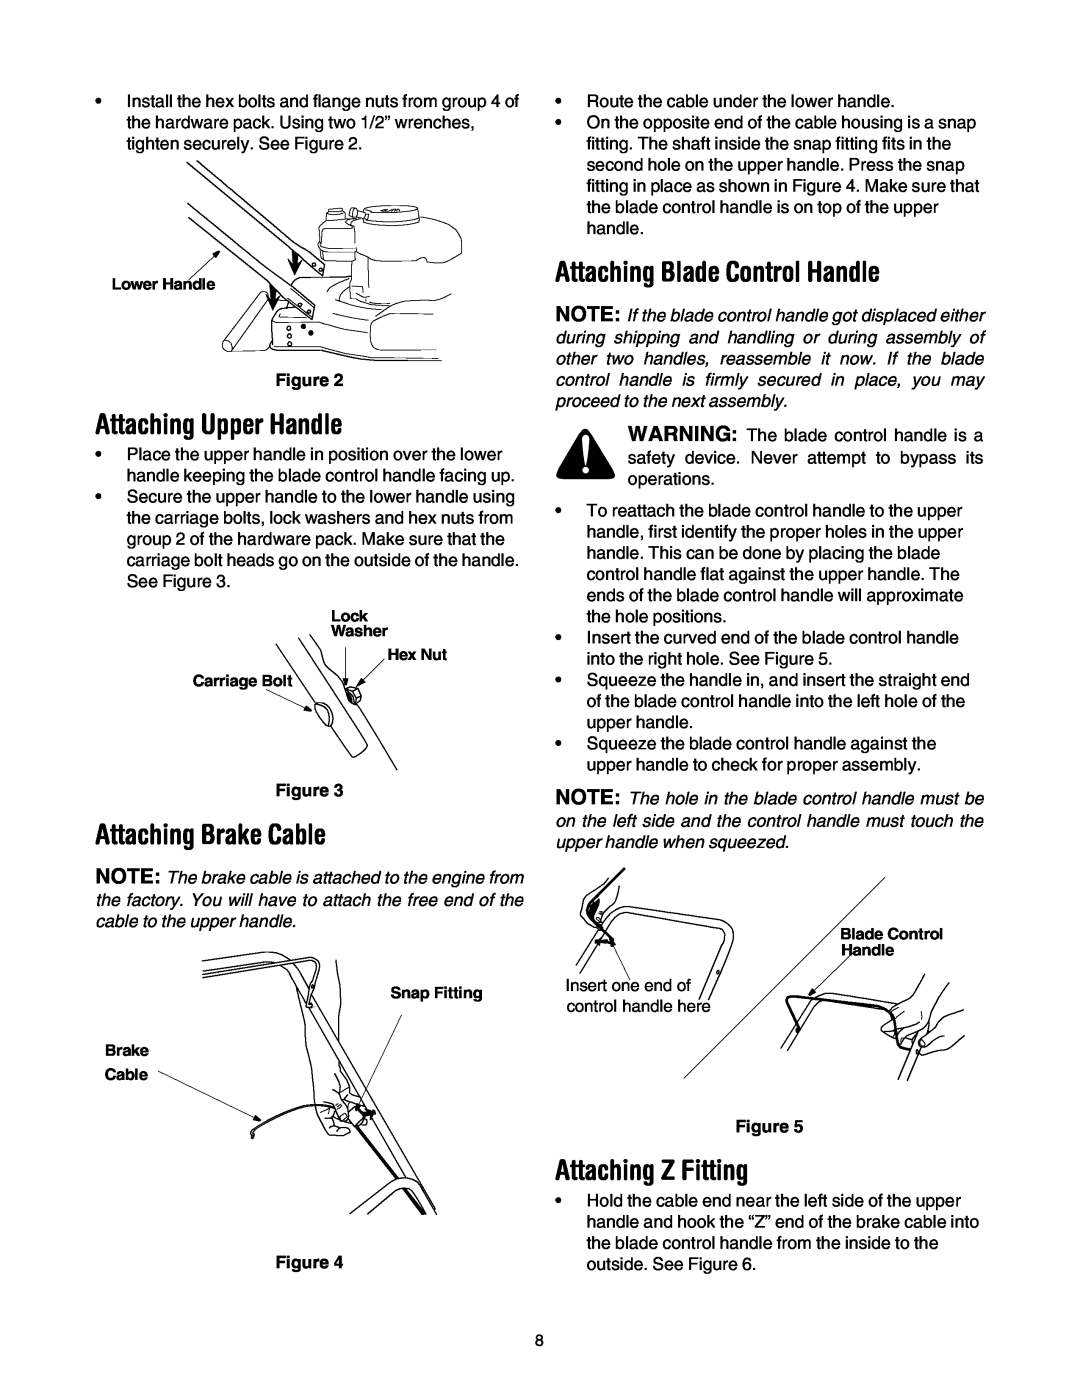 Yard Machines 20 manual Attaching Upper Handle, Attaching Brake Cable, Attaching Blade Control Handle, Attaching Z Fitting 